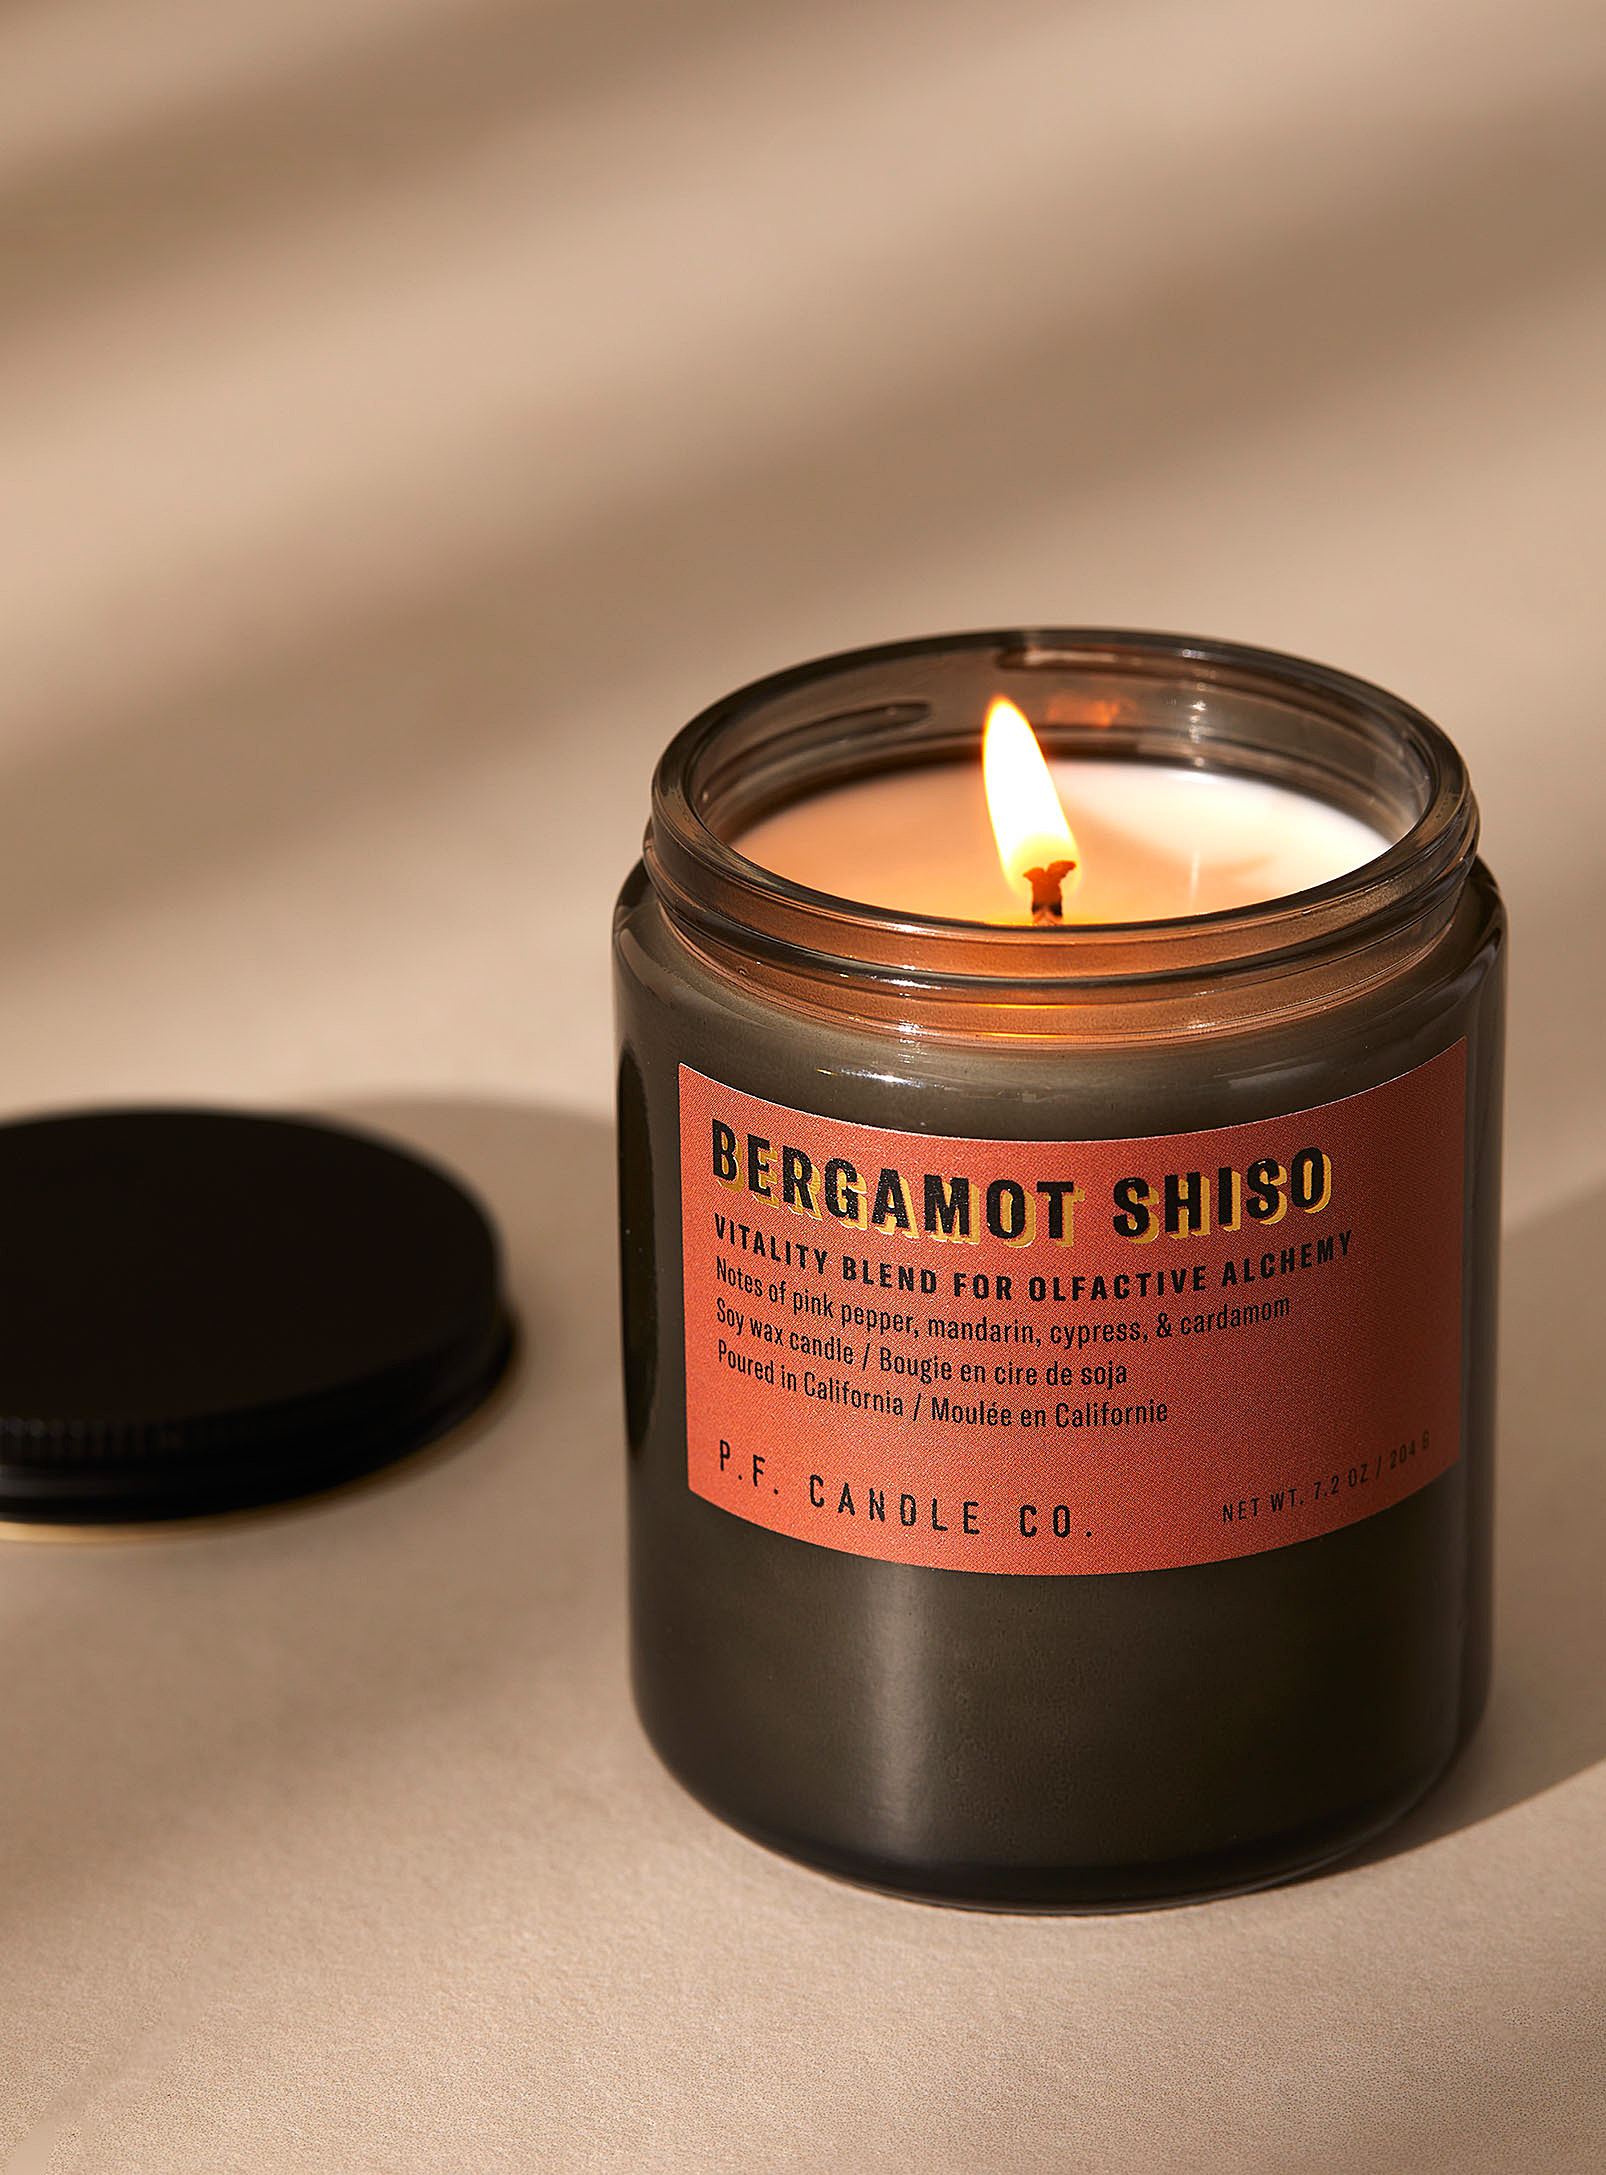 P.f Candle Co. Bergamot Shiso Candle In Copper